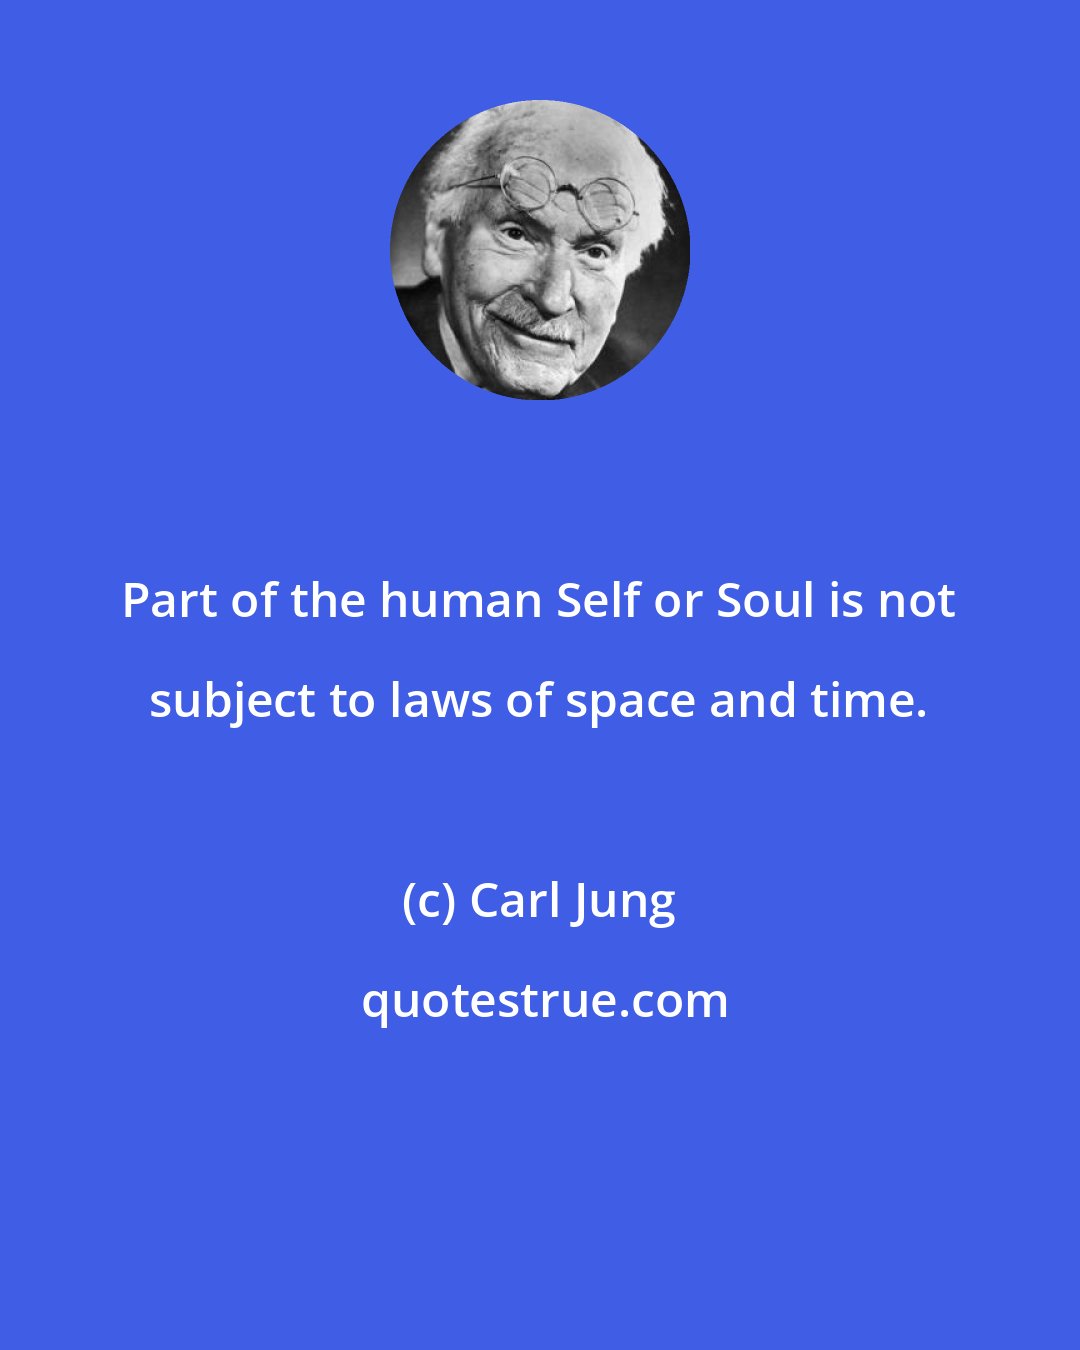 Carl Jung: Part of the human Self or Soul is not subject to laws of space and time.